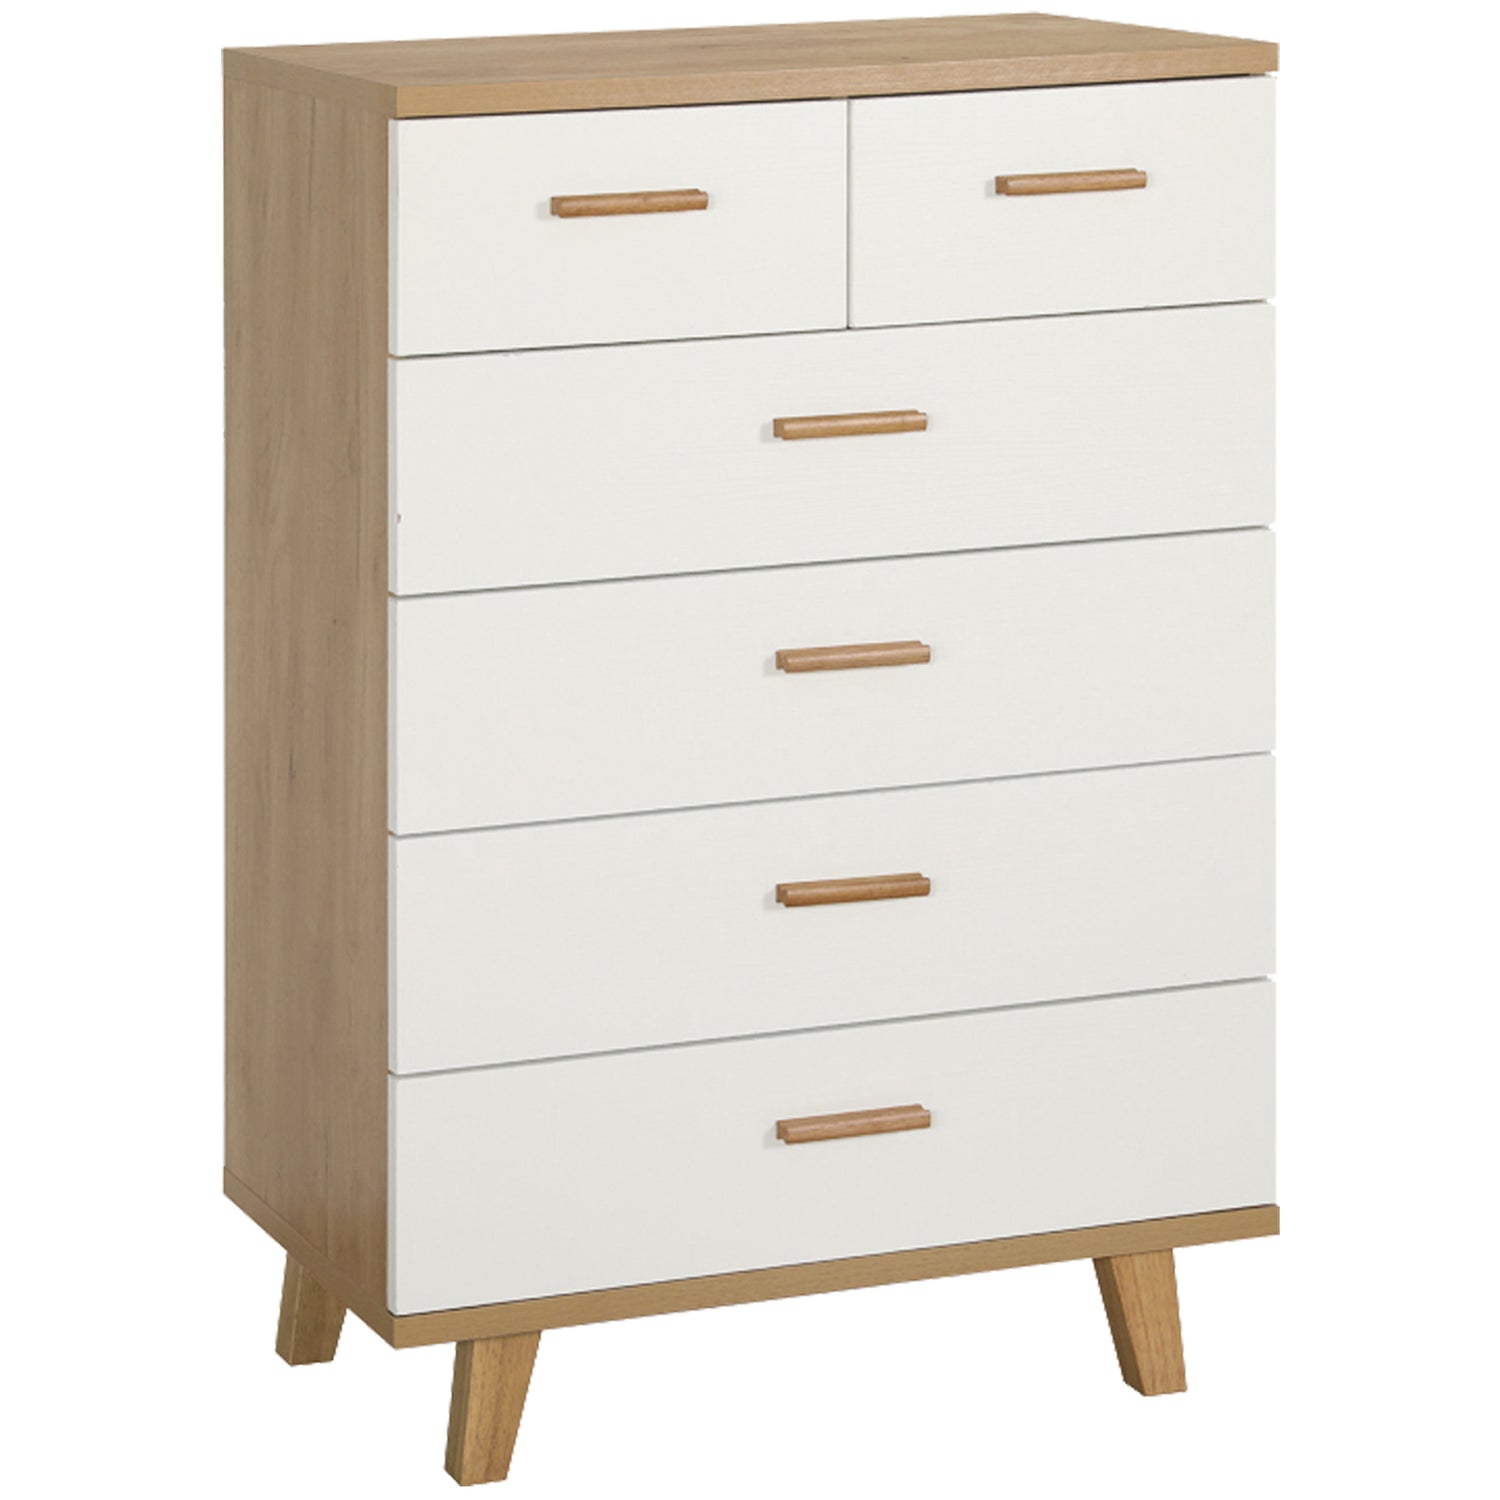 SYNGAR 6 Drawer Dresser, Chest of Drawers for Bedroom, Tall Storage Ca ...